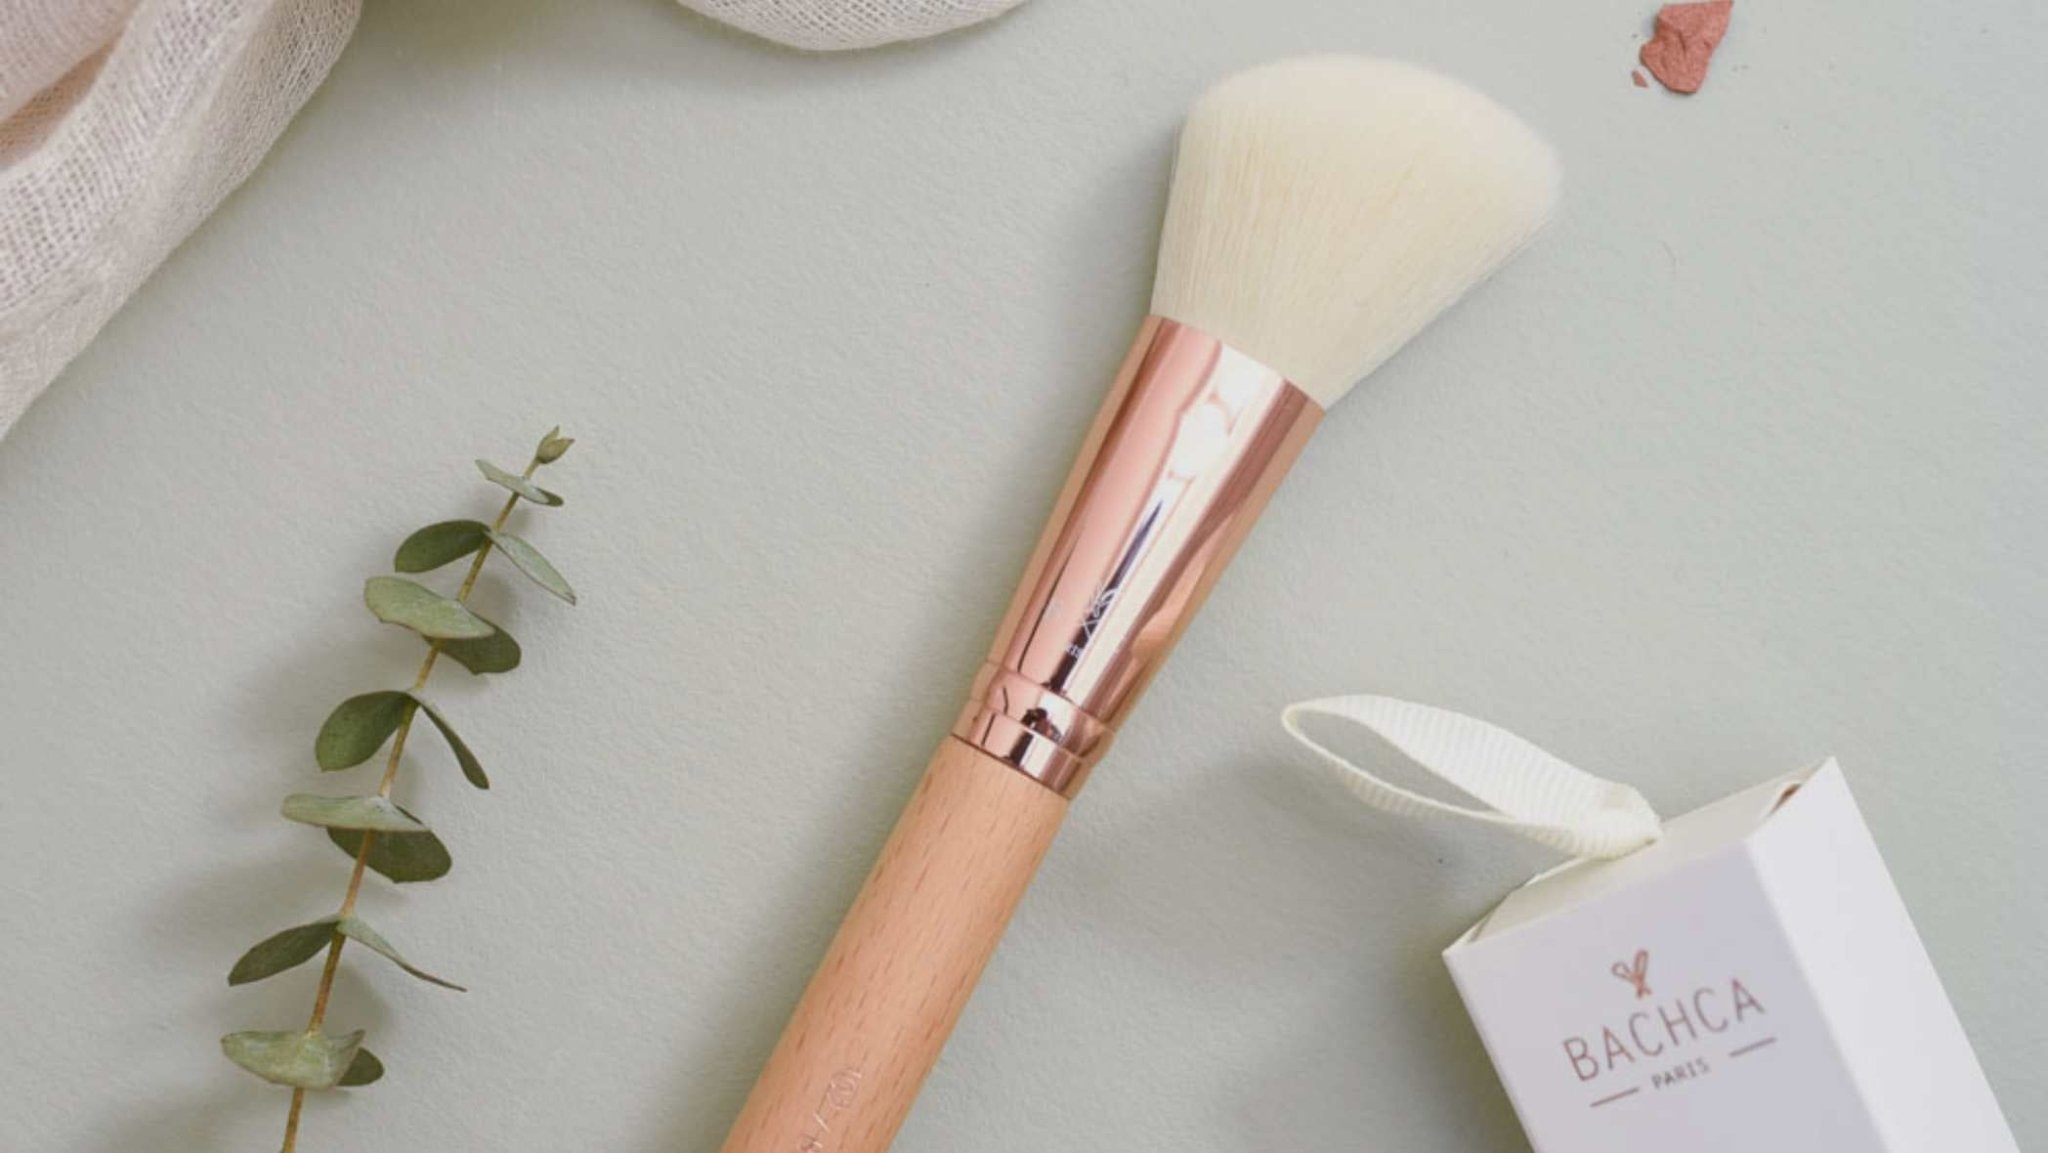 A complete guide to cleaning makeup brushes - French Beauty Co.